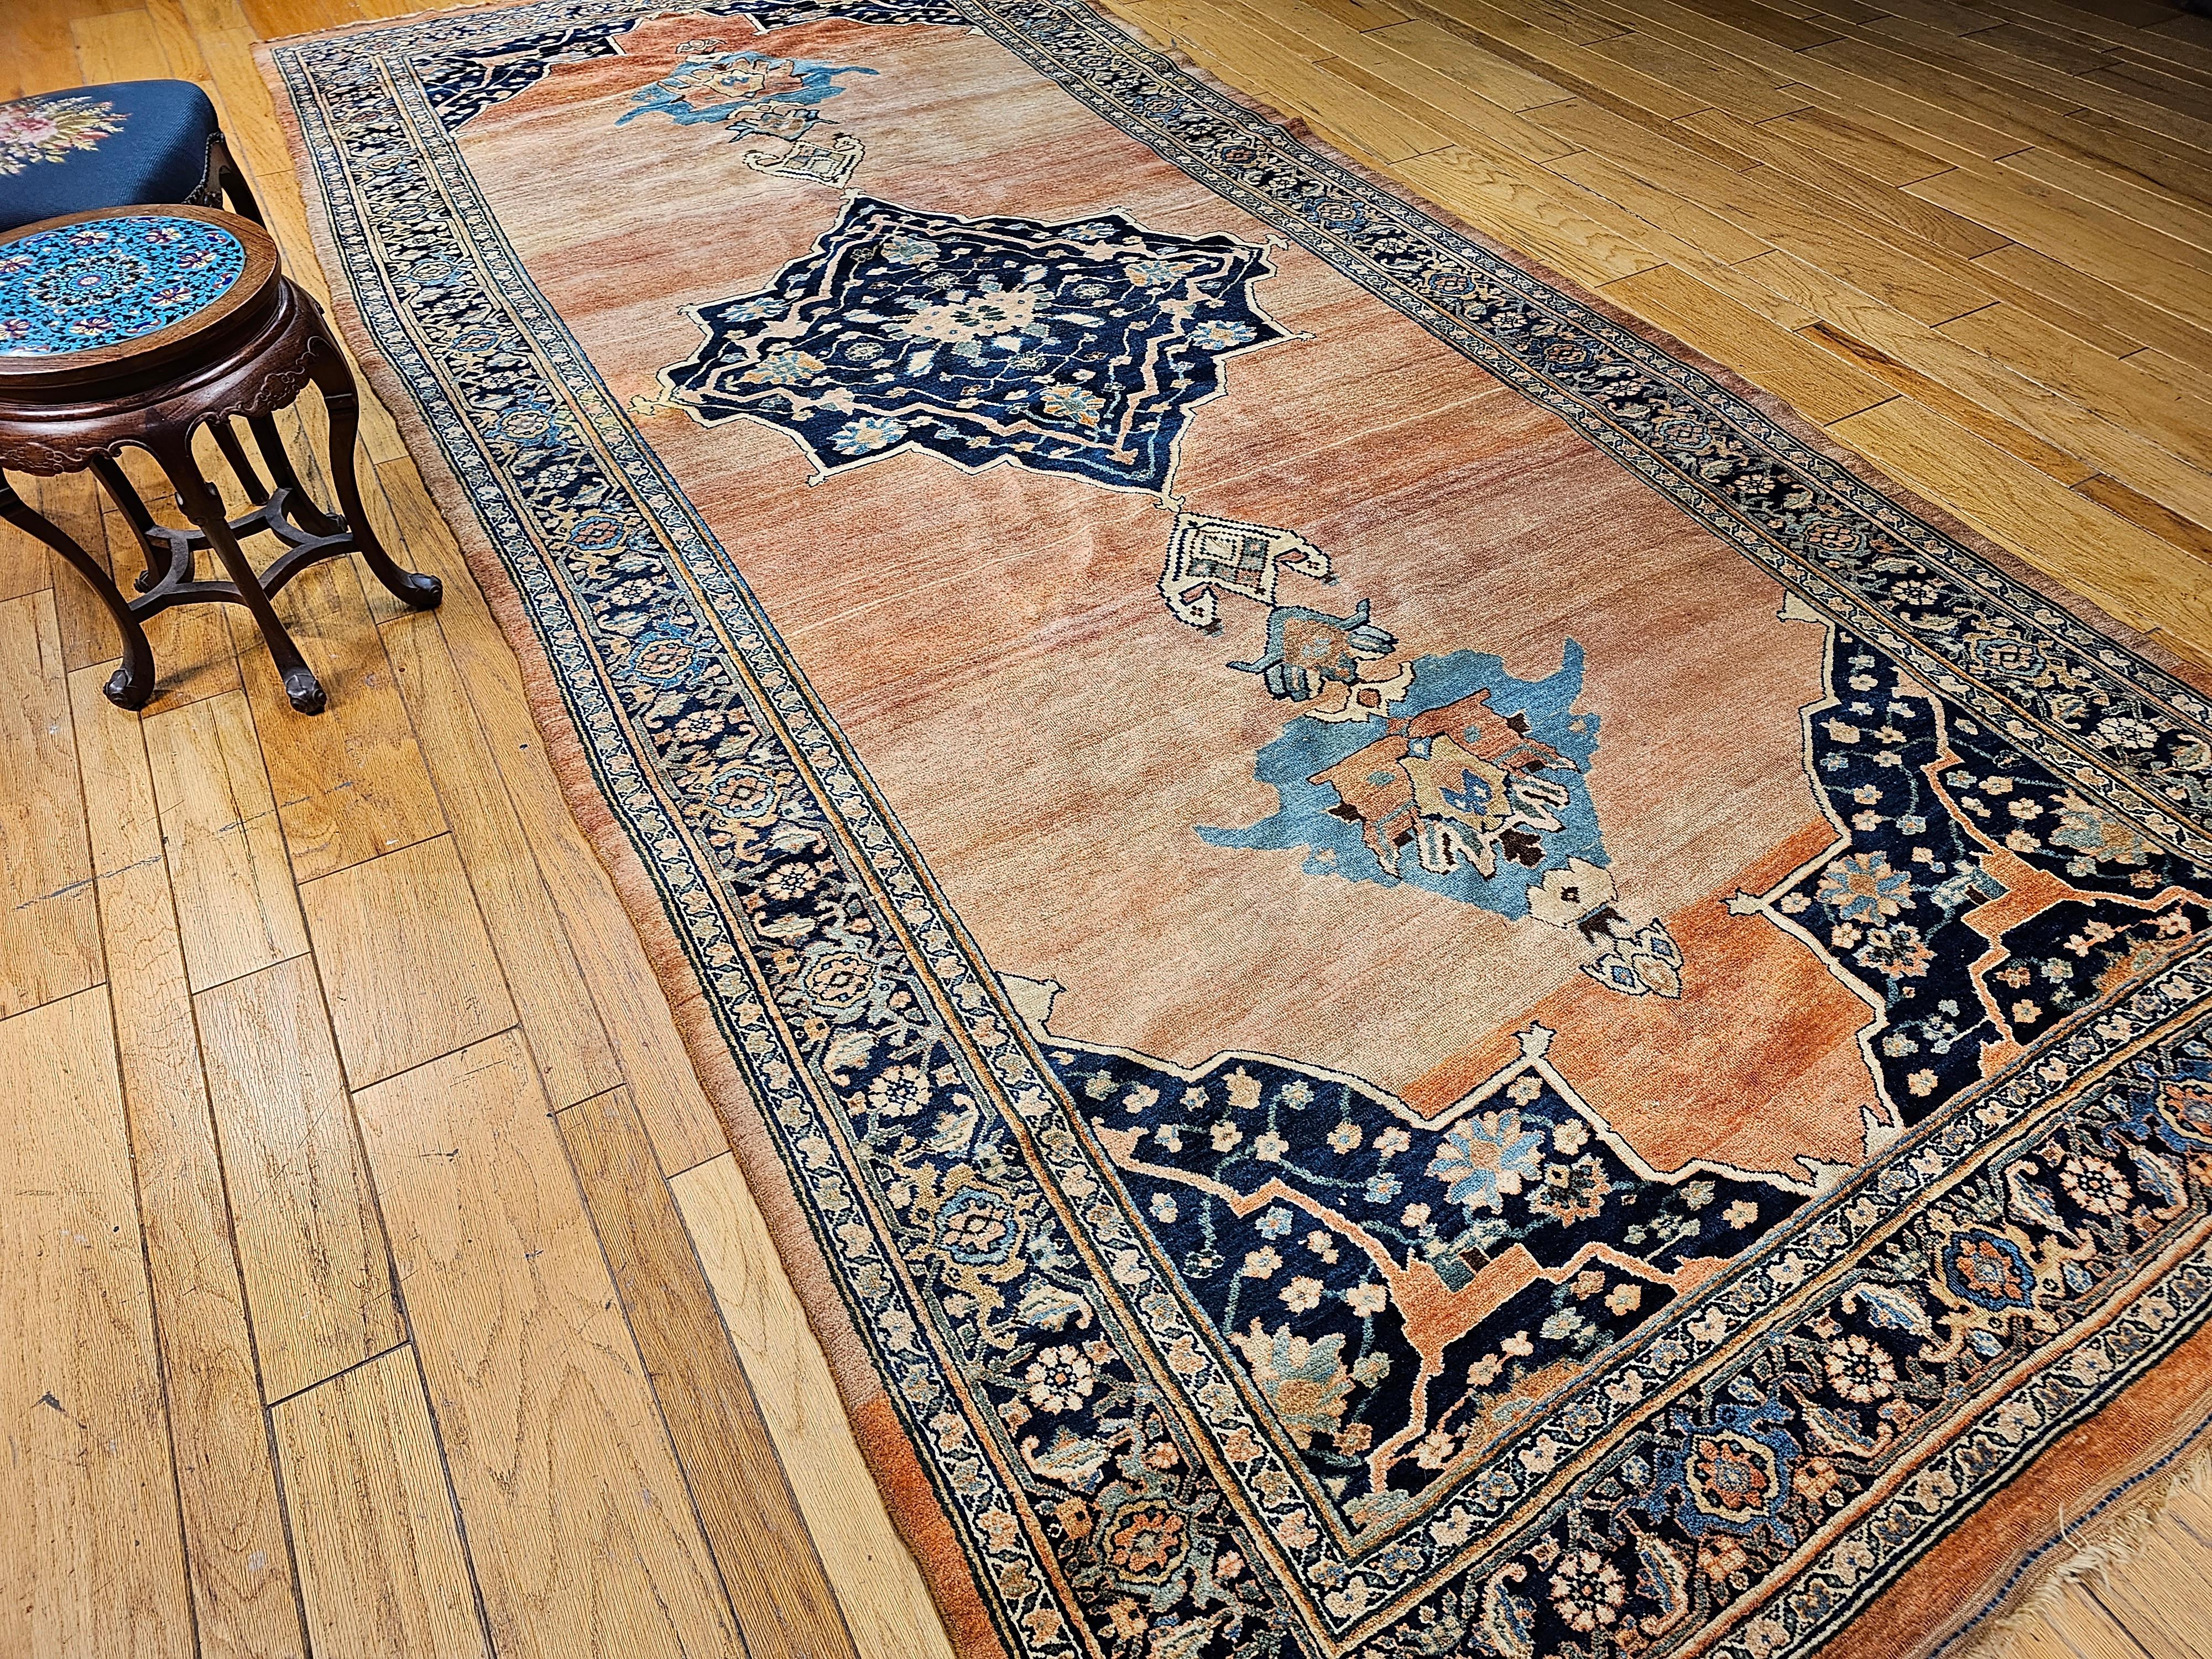 19th Century Persian Bidjar Gallery Rug in Brick-Red, Navy, Turquoise, Yellow For Sale 7